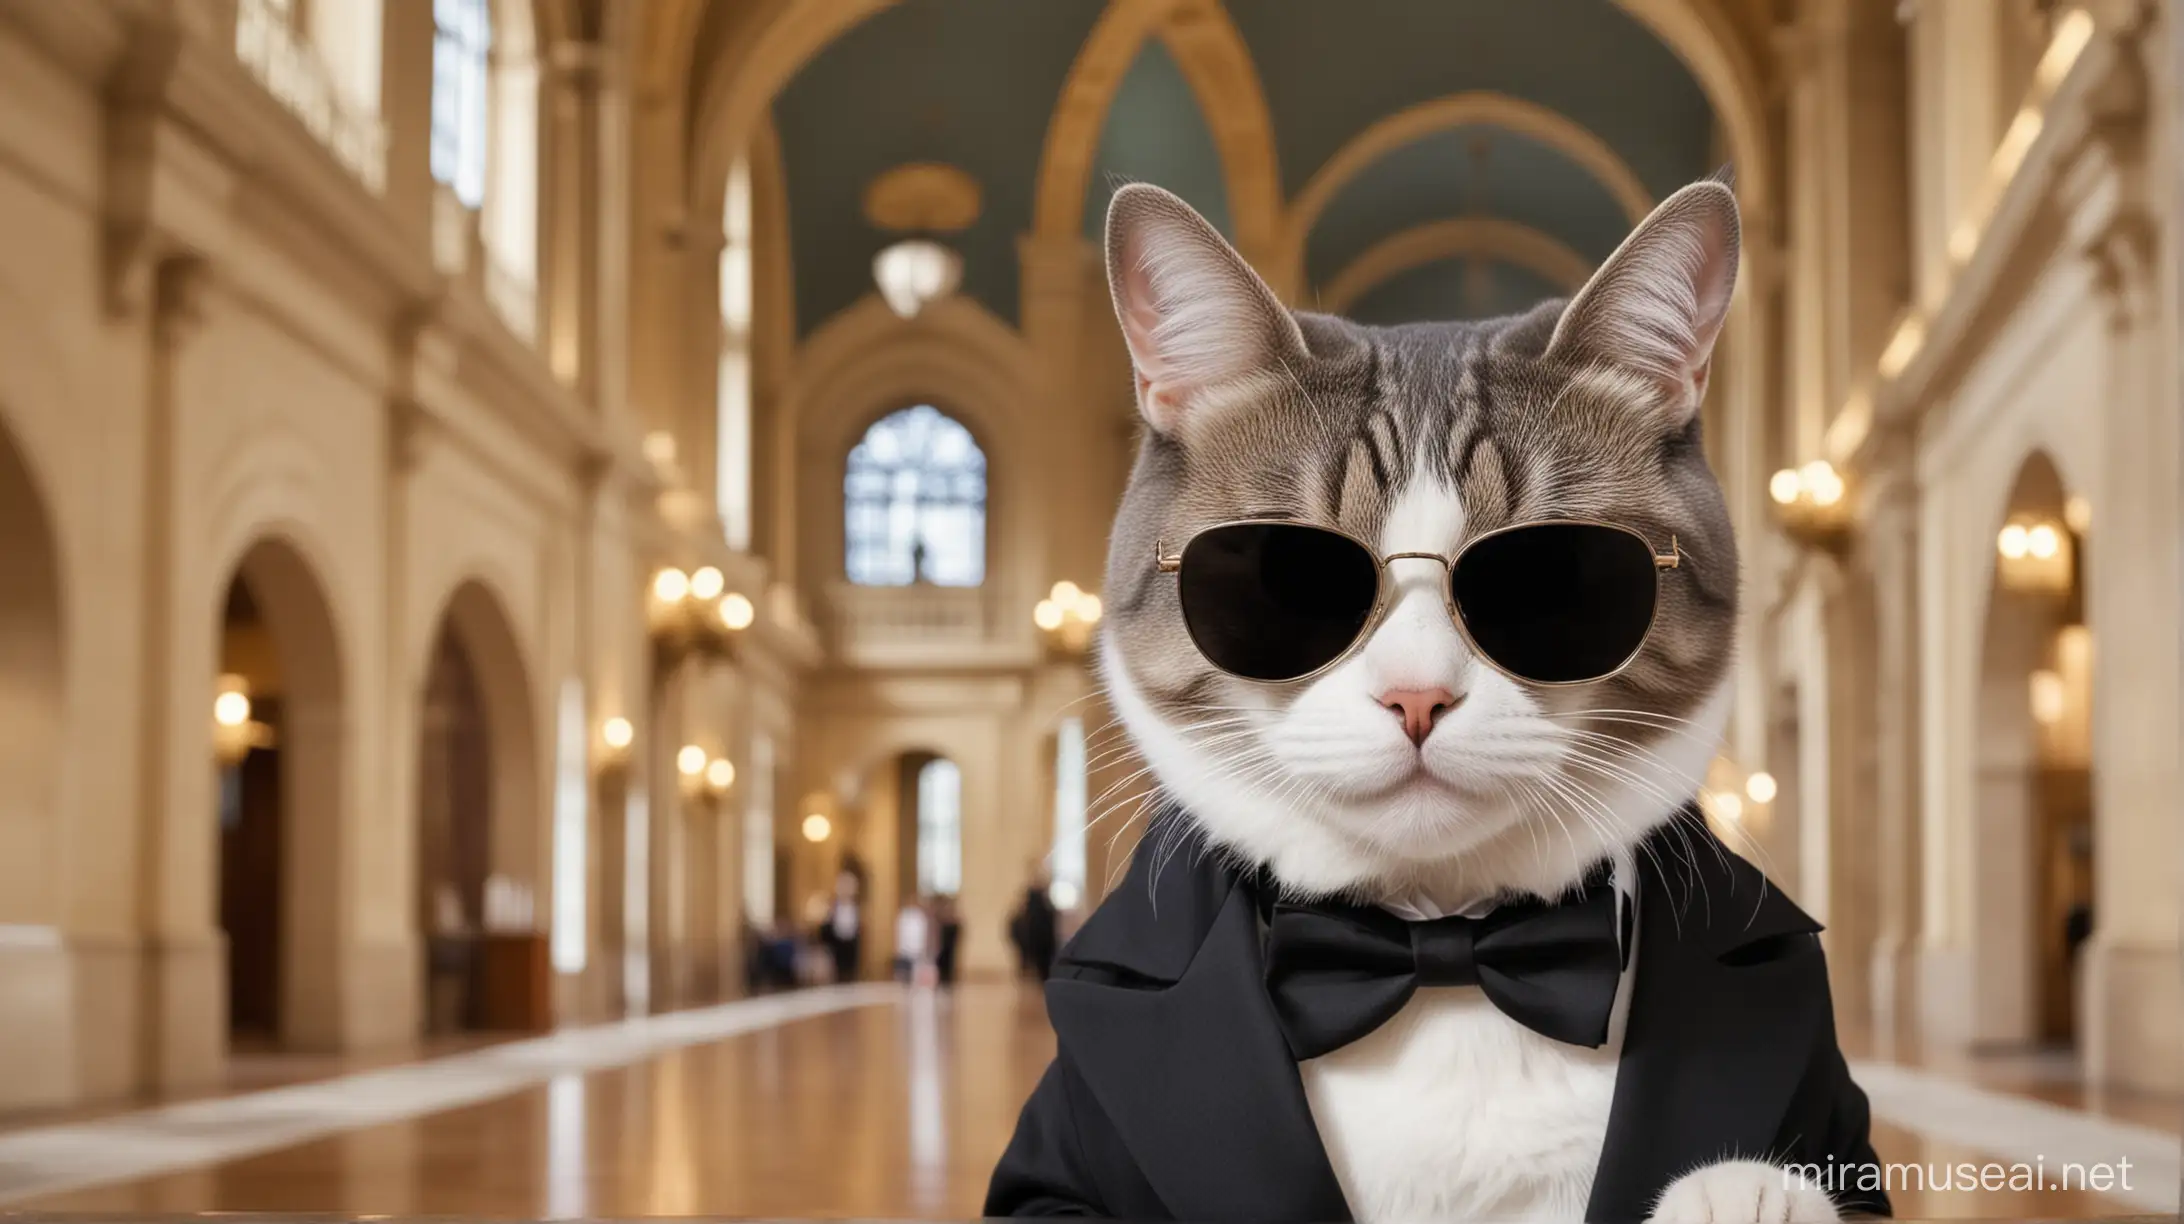 Elegant Feline in Tuxedo and Shades Posing in a Majestic Hall